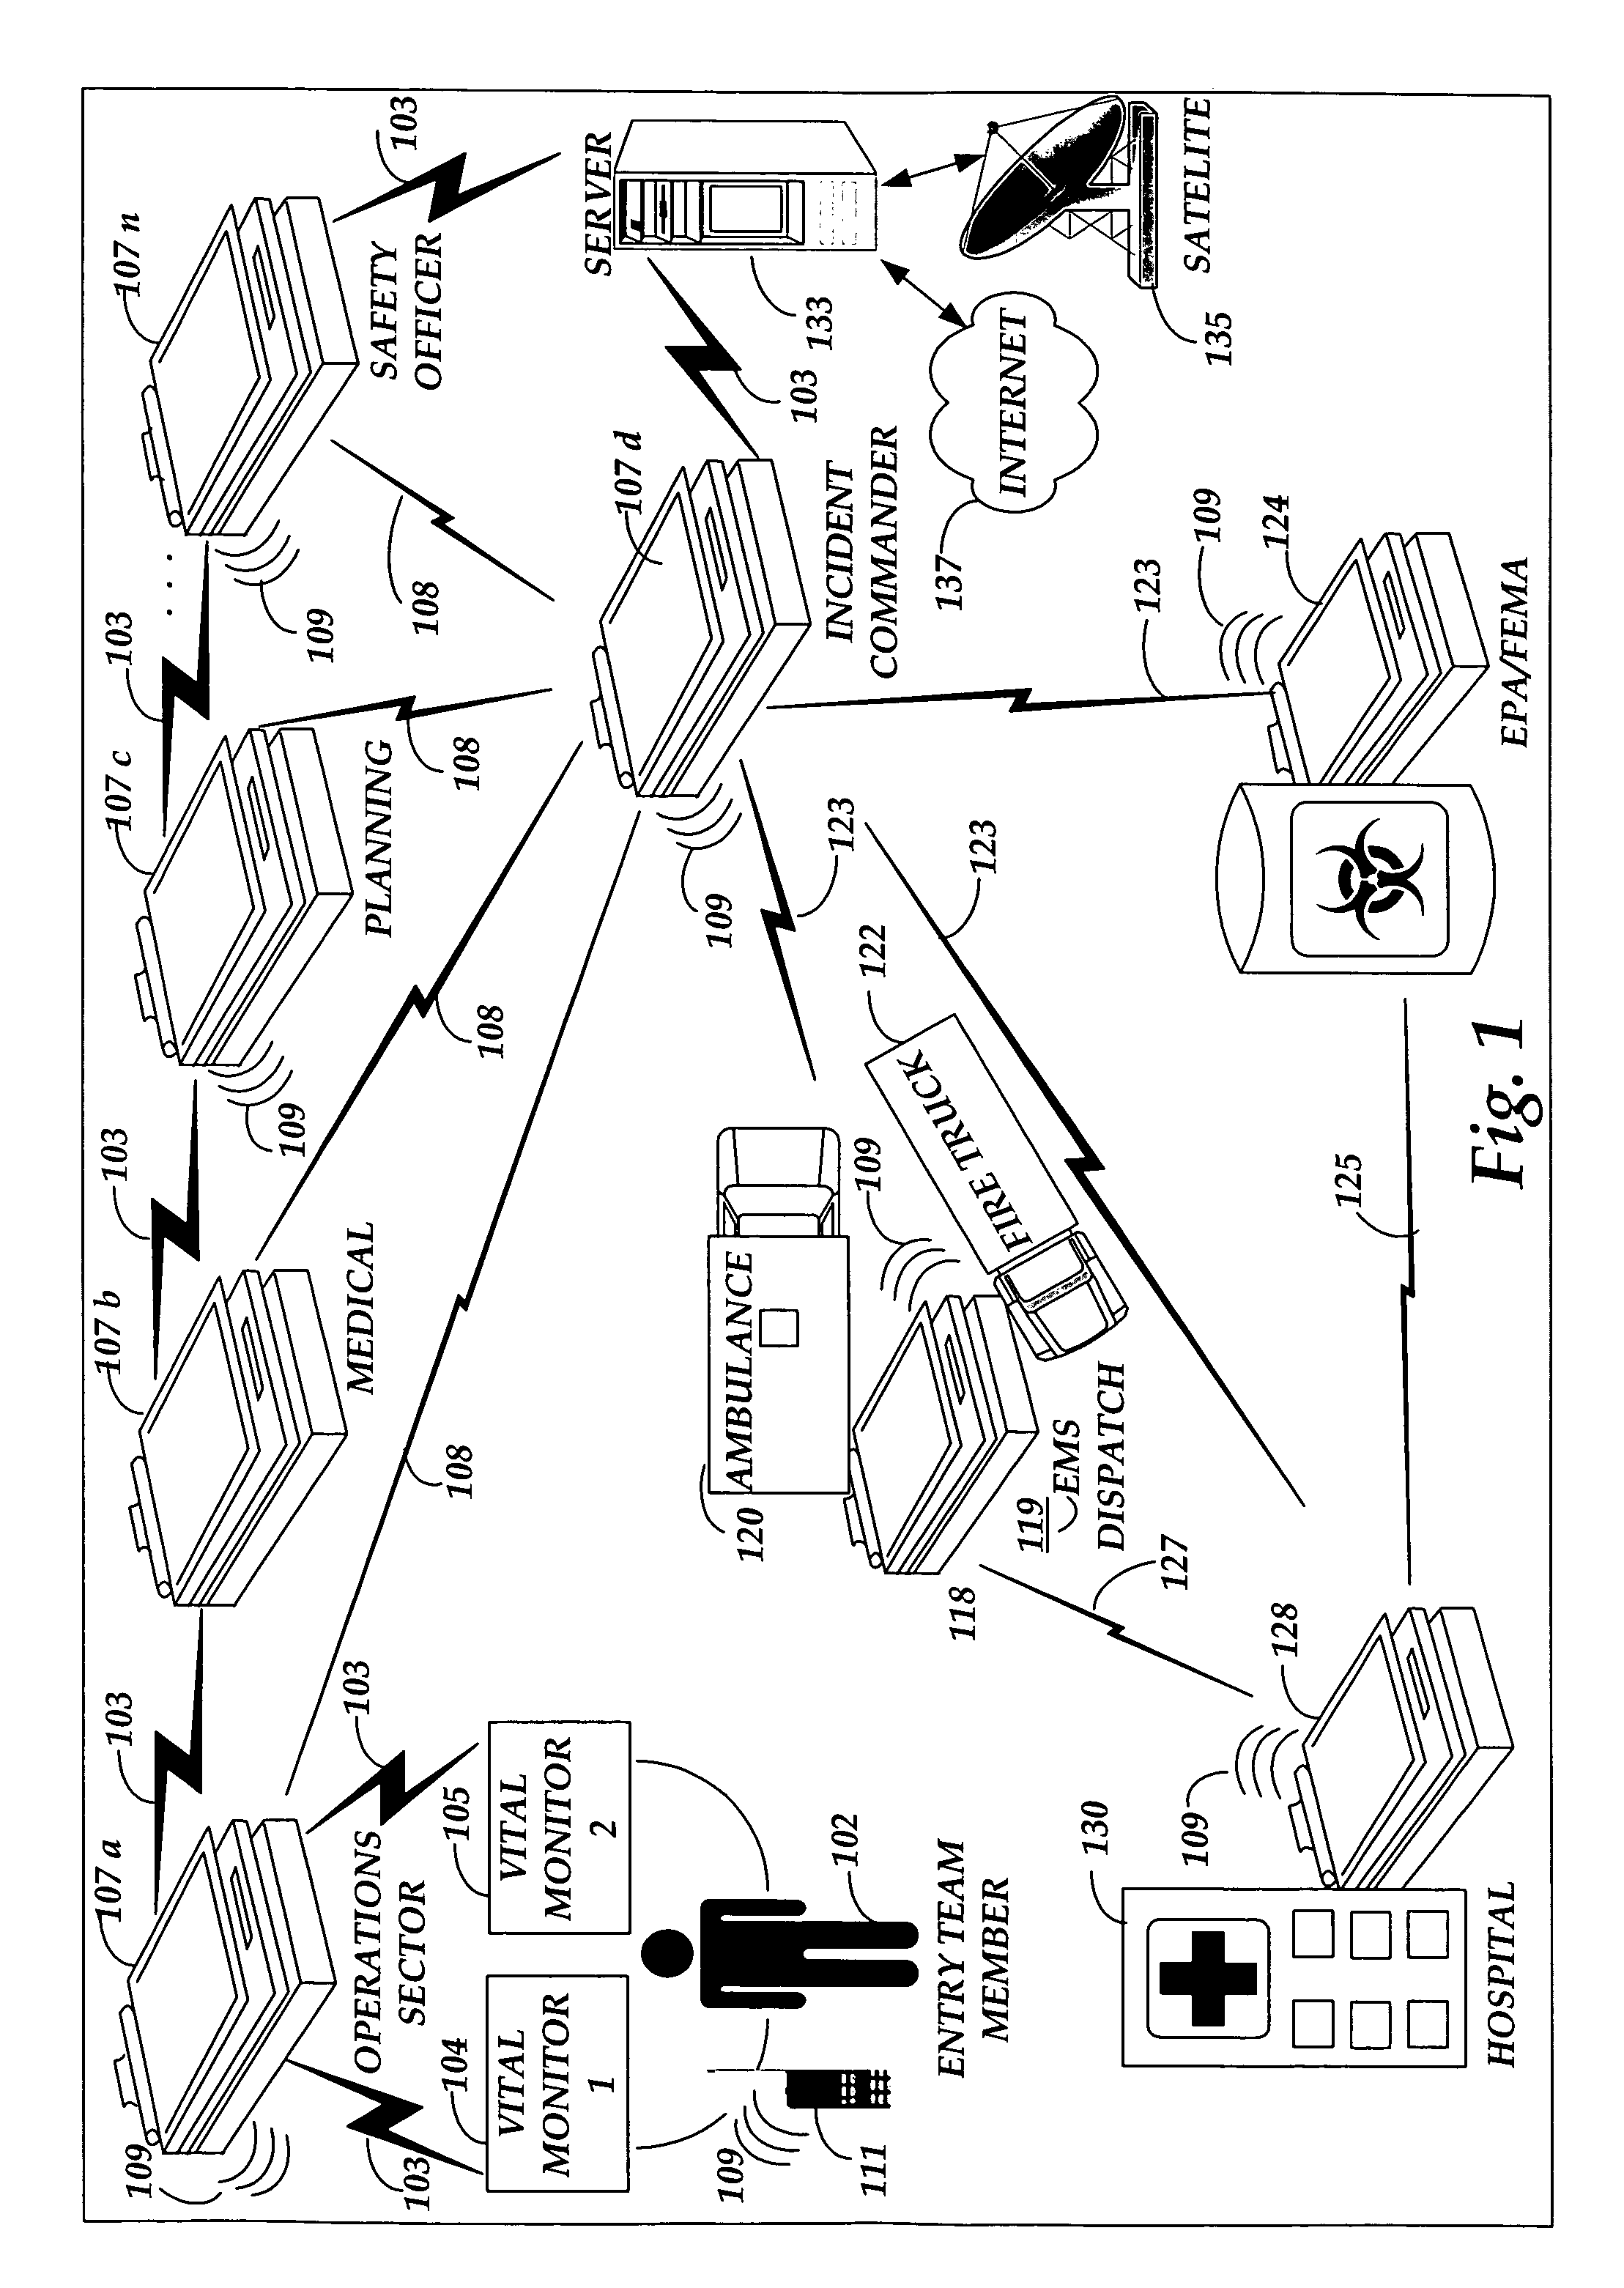 Acquiring and processing data associated with an incident among multiple networked computing apparatuses